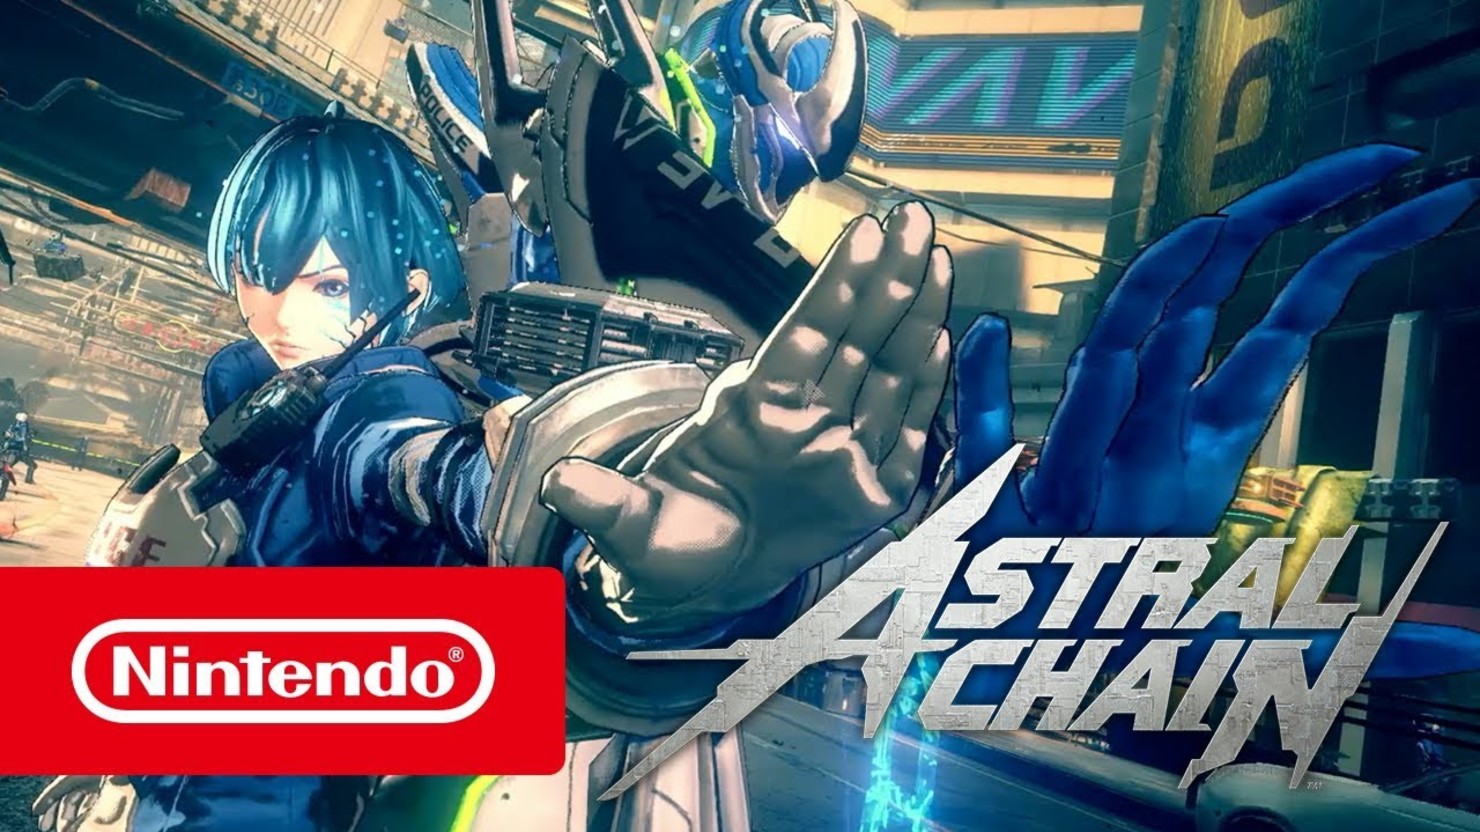 Astral Chain Nintendo Switch. Astral Chain Nintendo Switch Скриншоты. Astral Chain Nintendo обзор. Astral Chain геймплей.